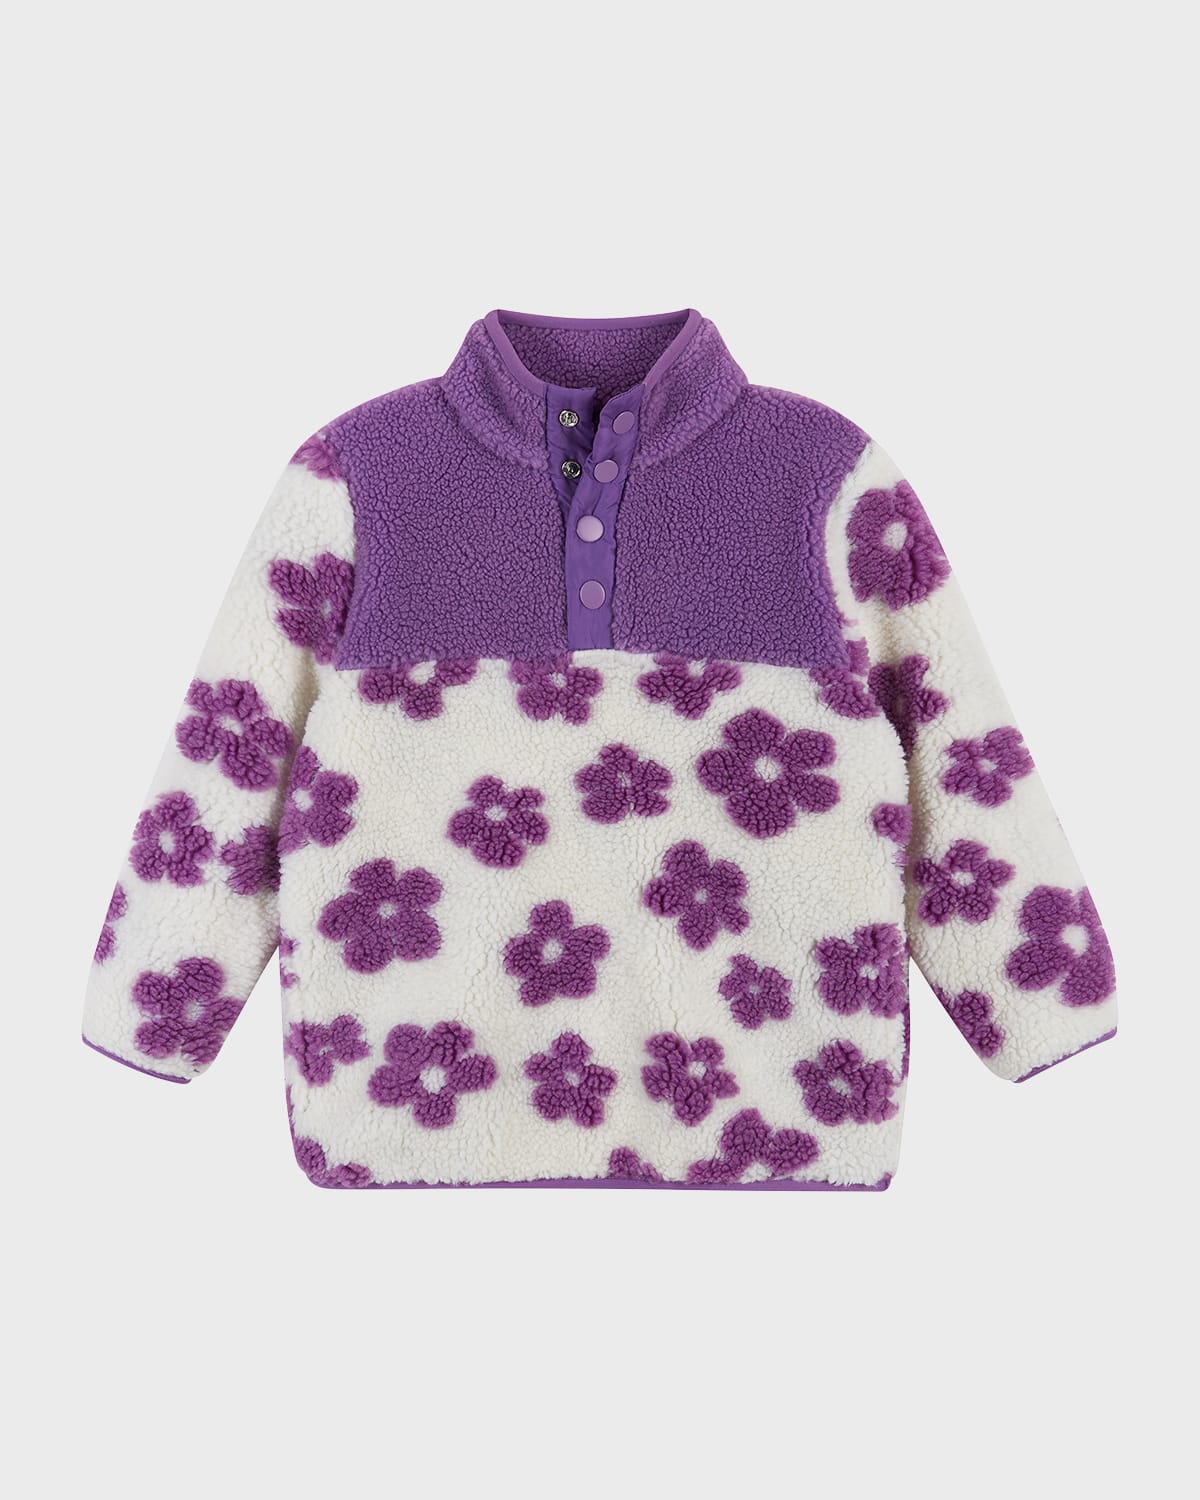 ANDY & EVAN GIRL'S FLORAL-PRINT PULLOVER